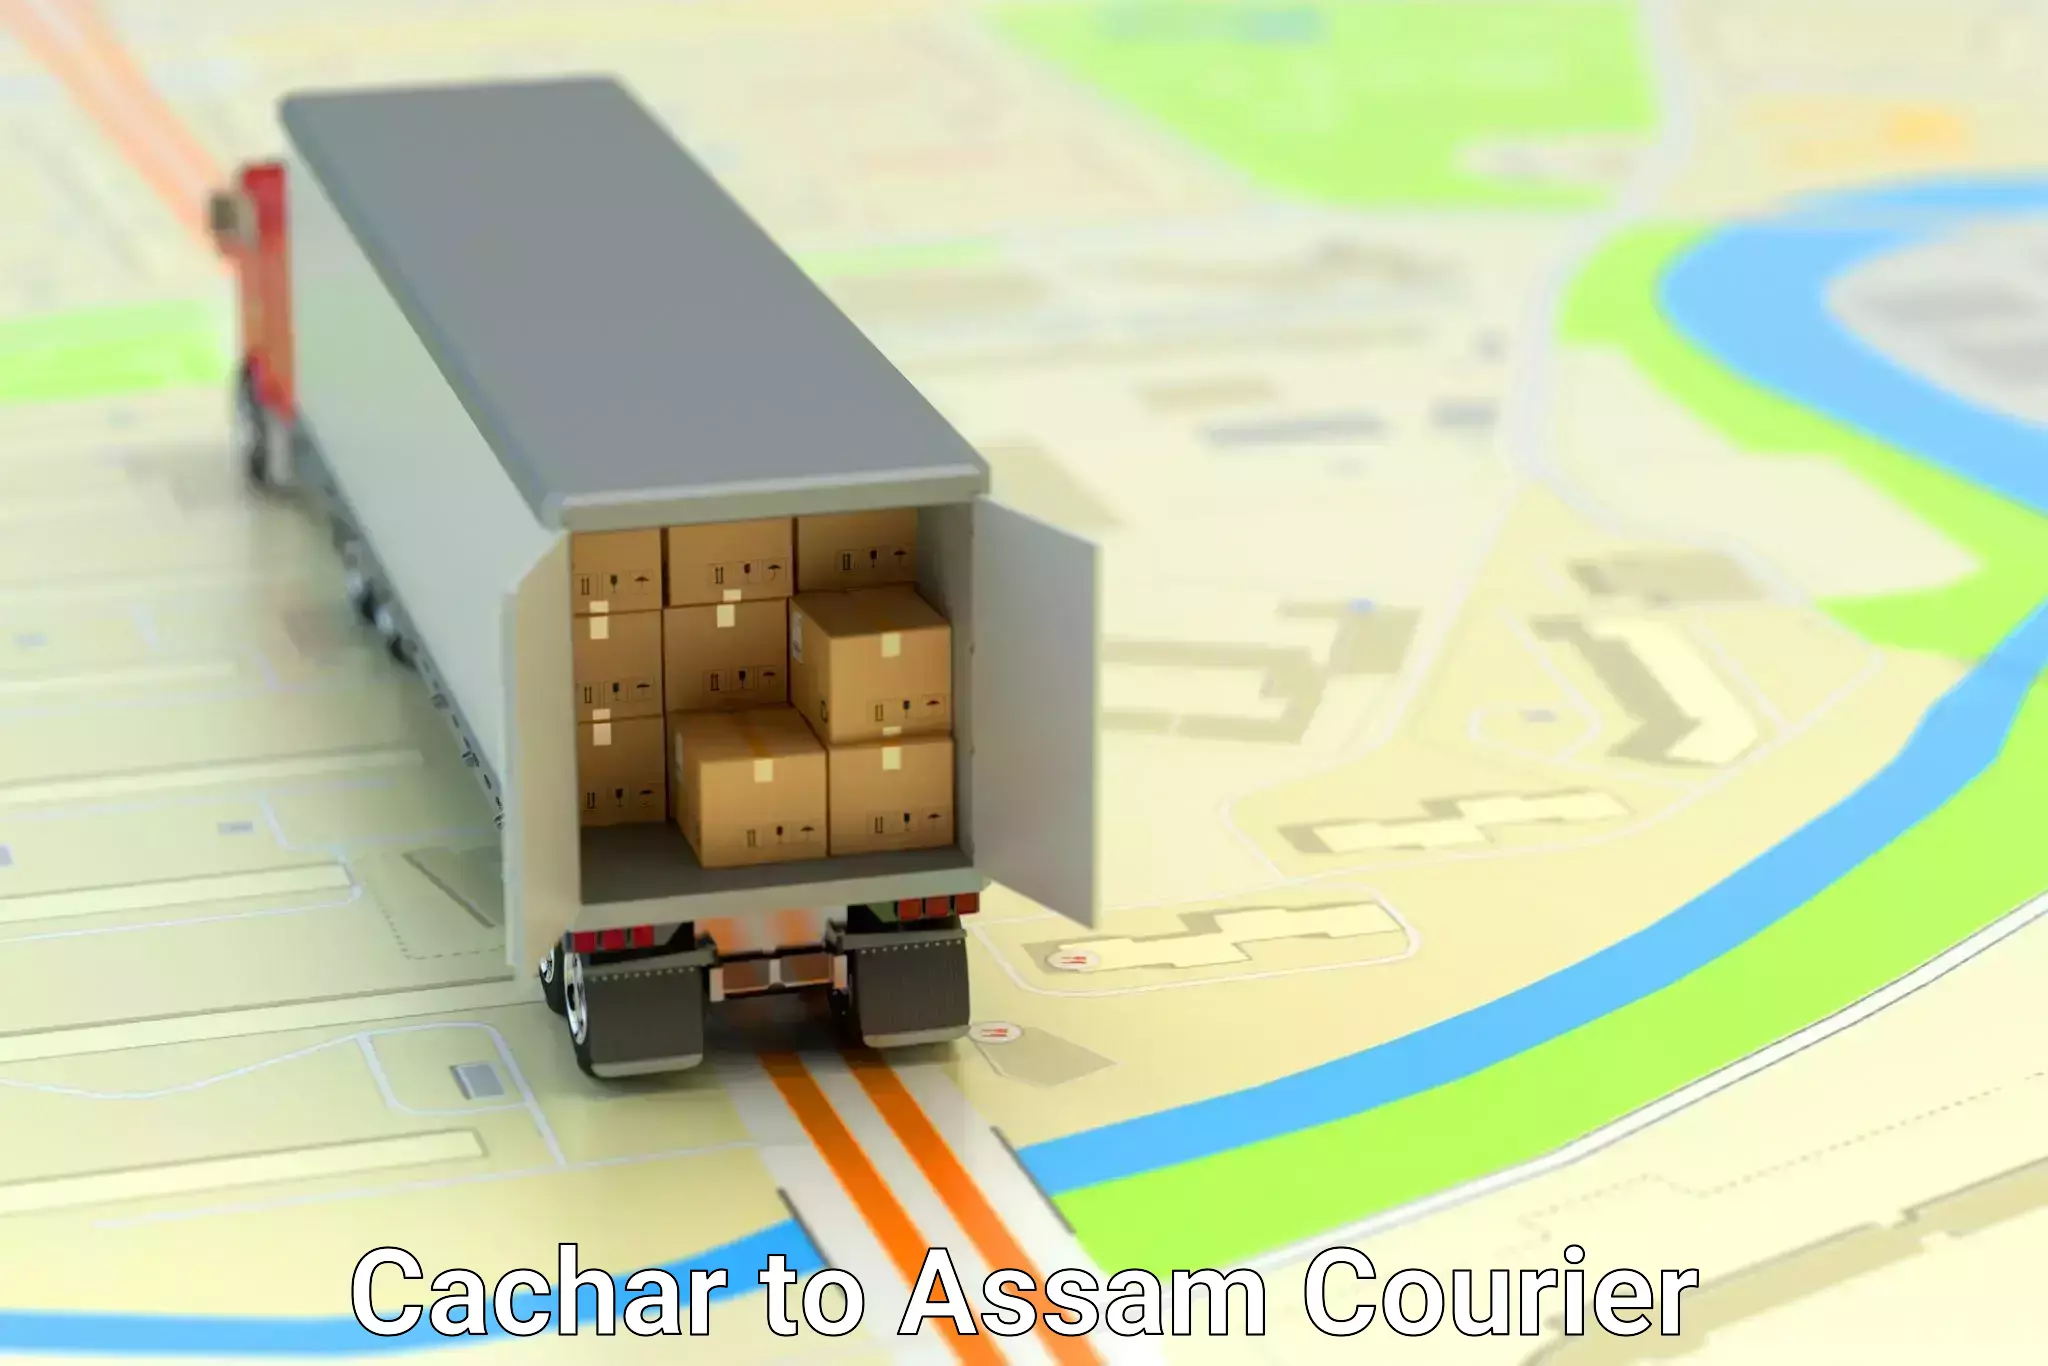 Expedited shipping solutions Cachar to Dhupdhara